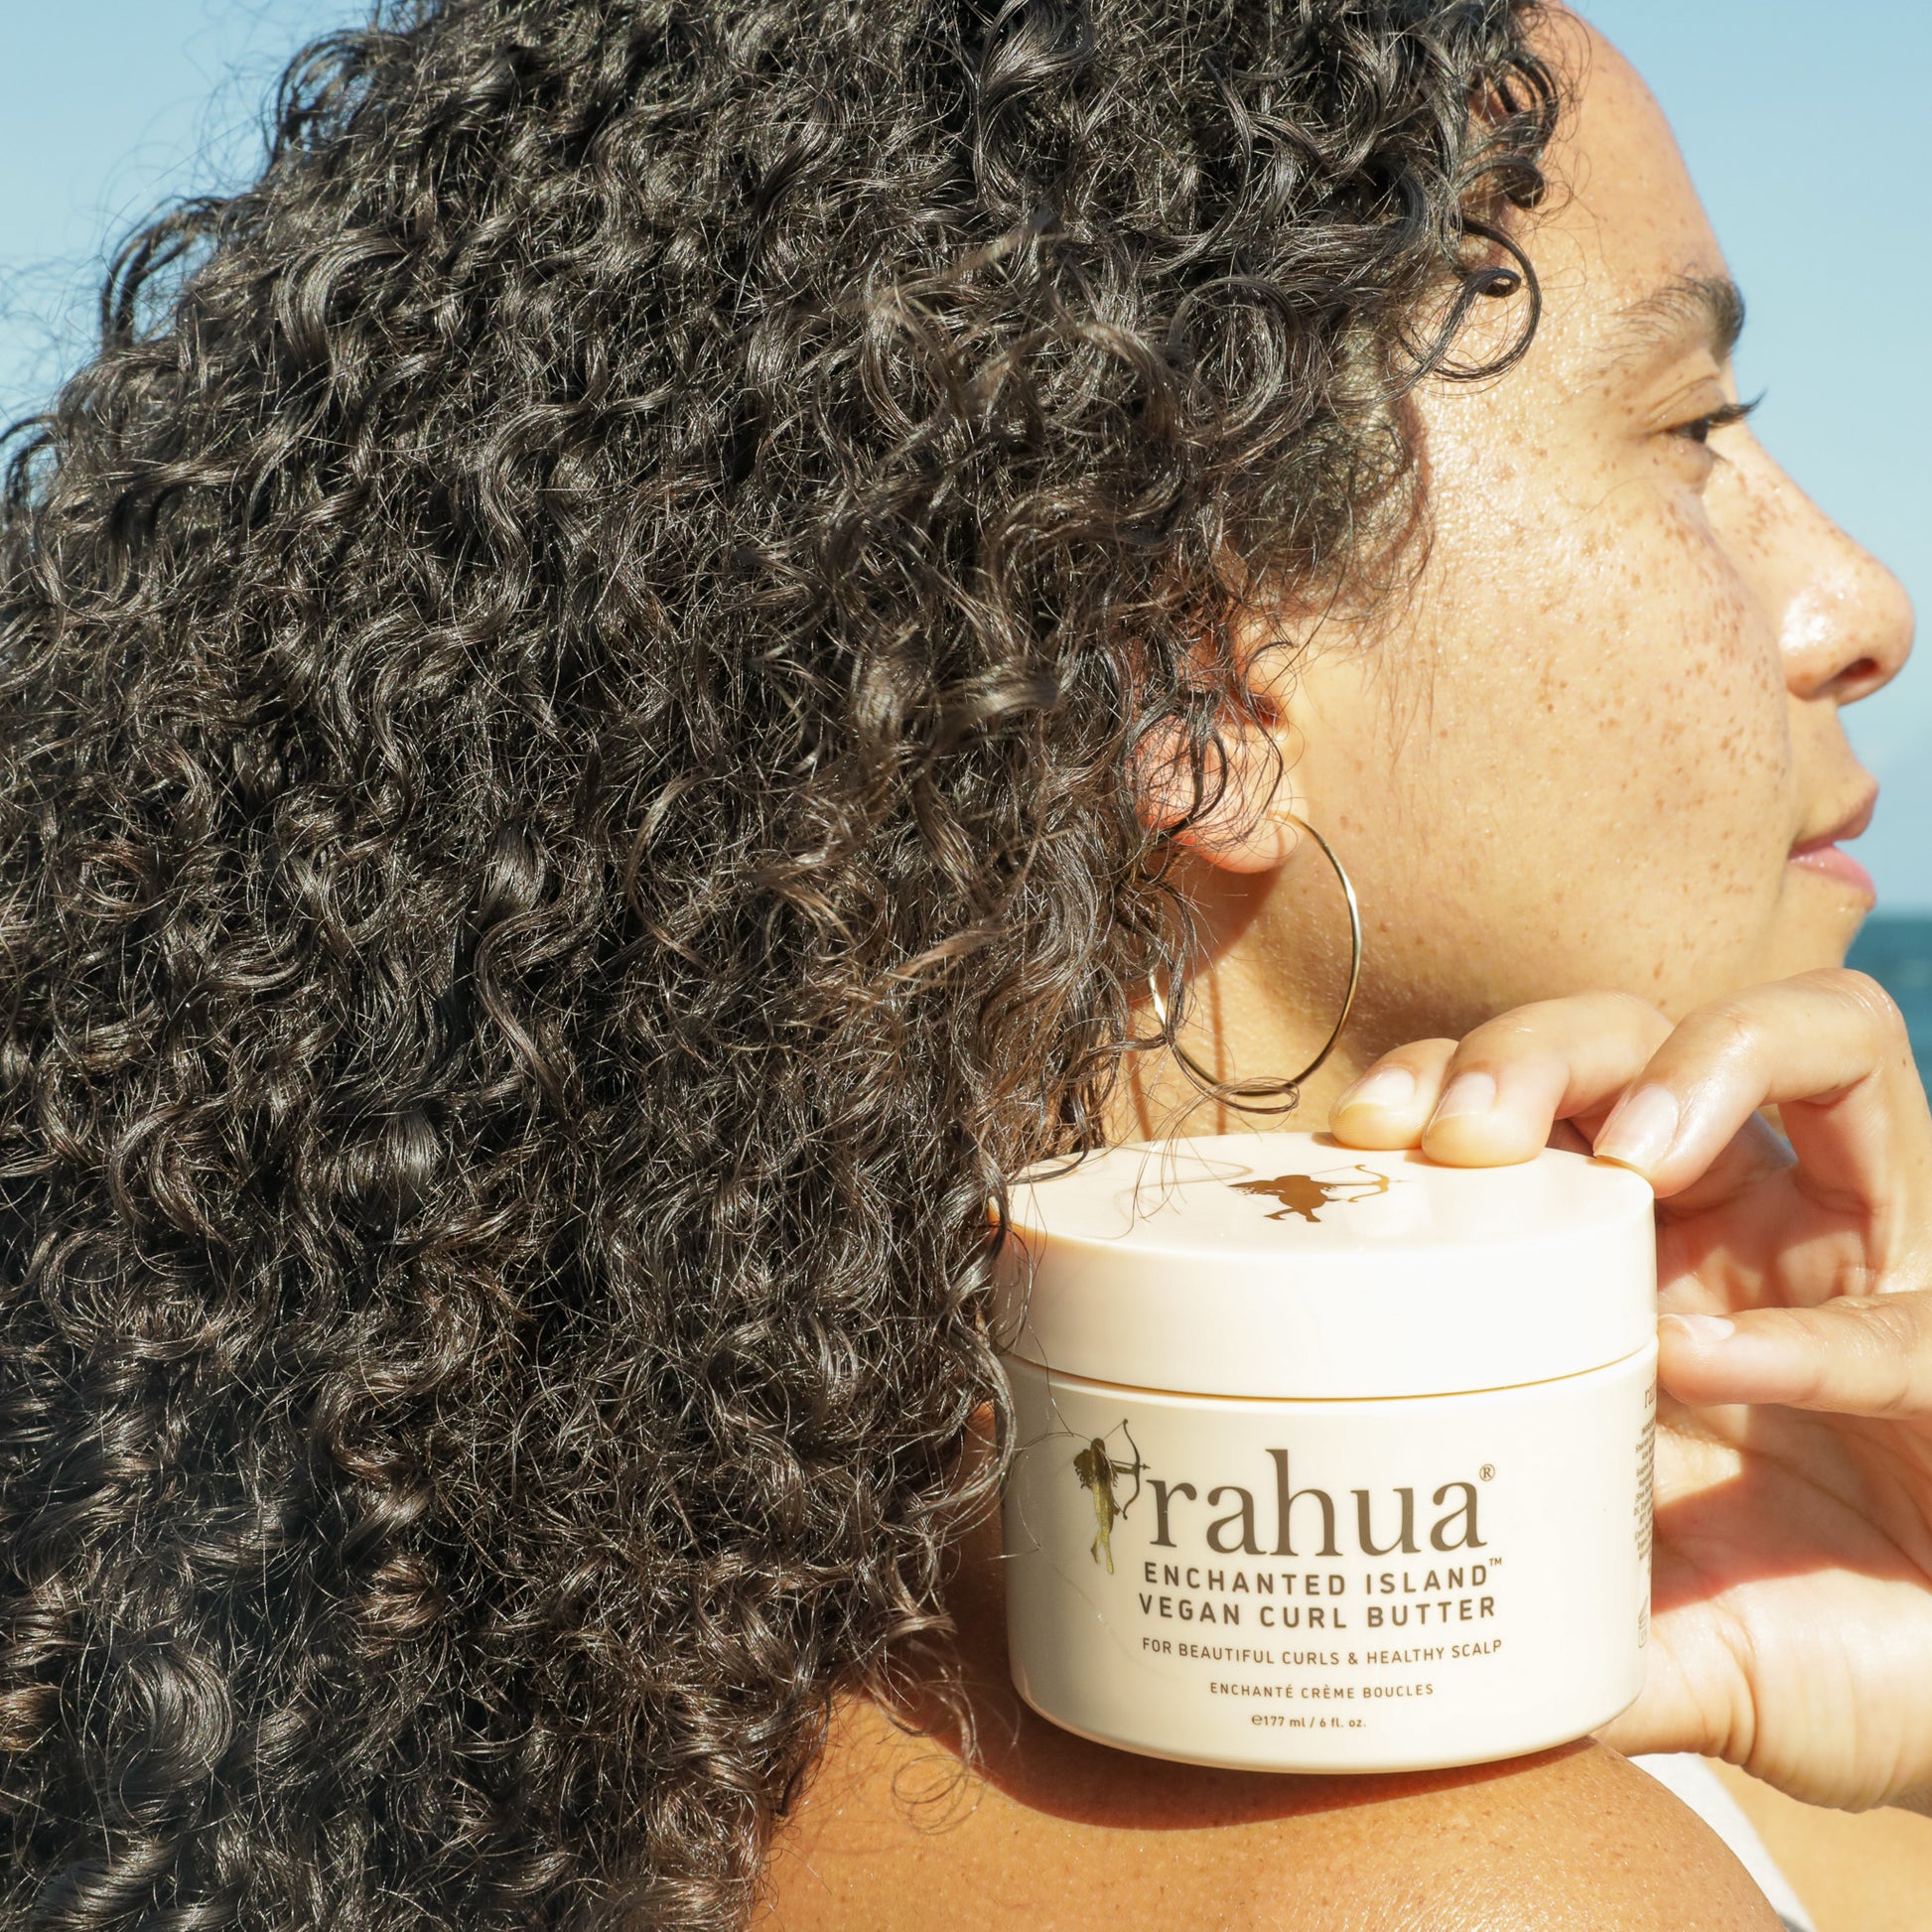 Model with curly hair holding Vegan Curl Butter